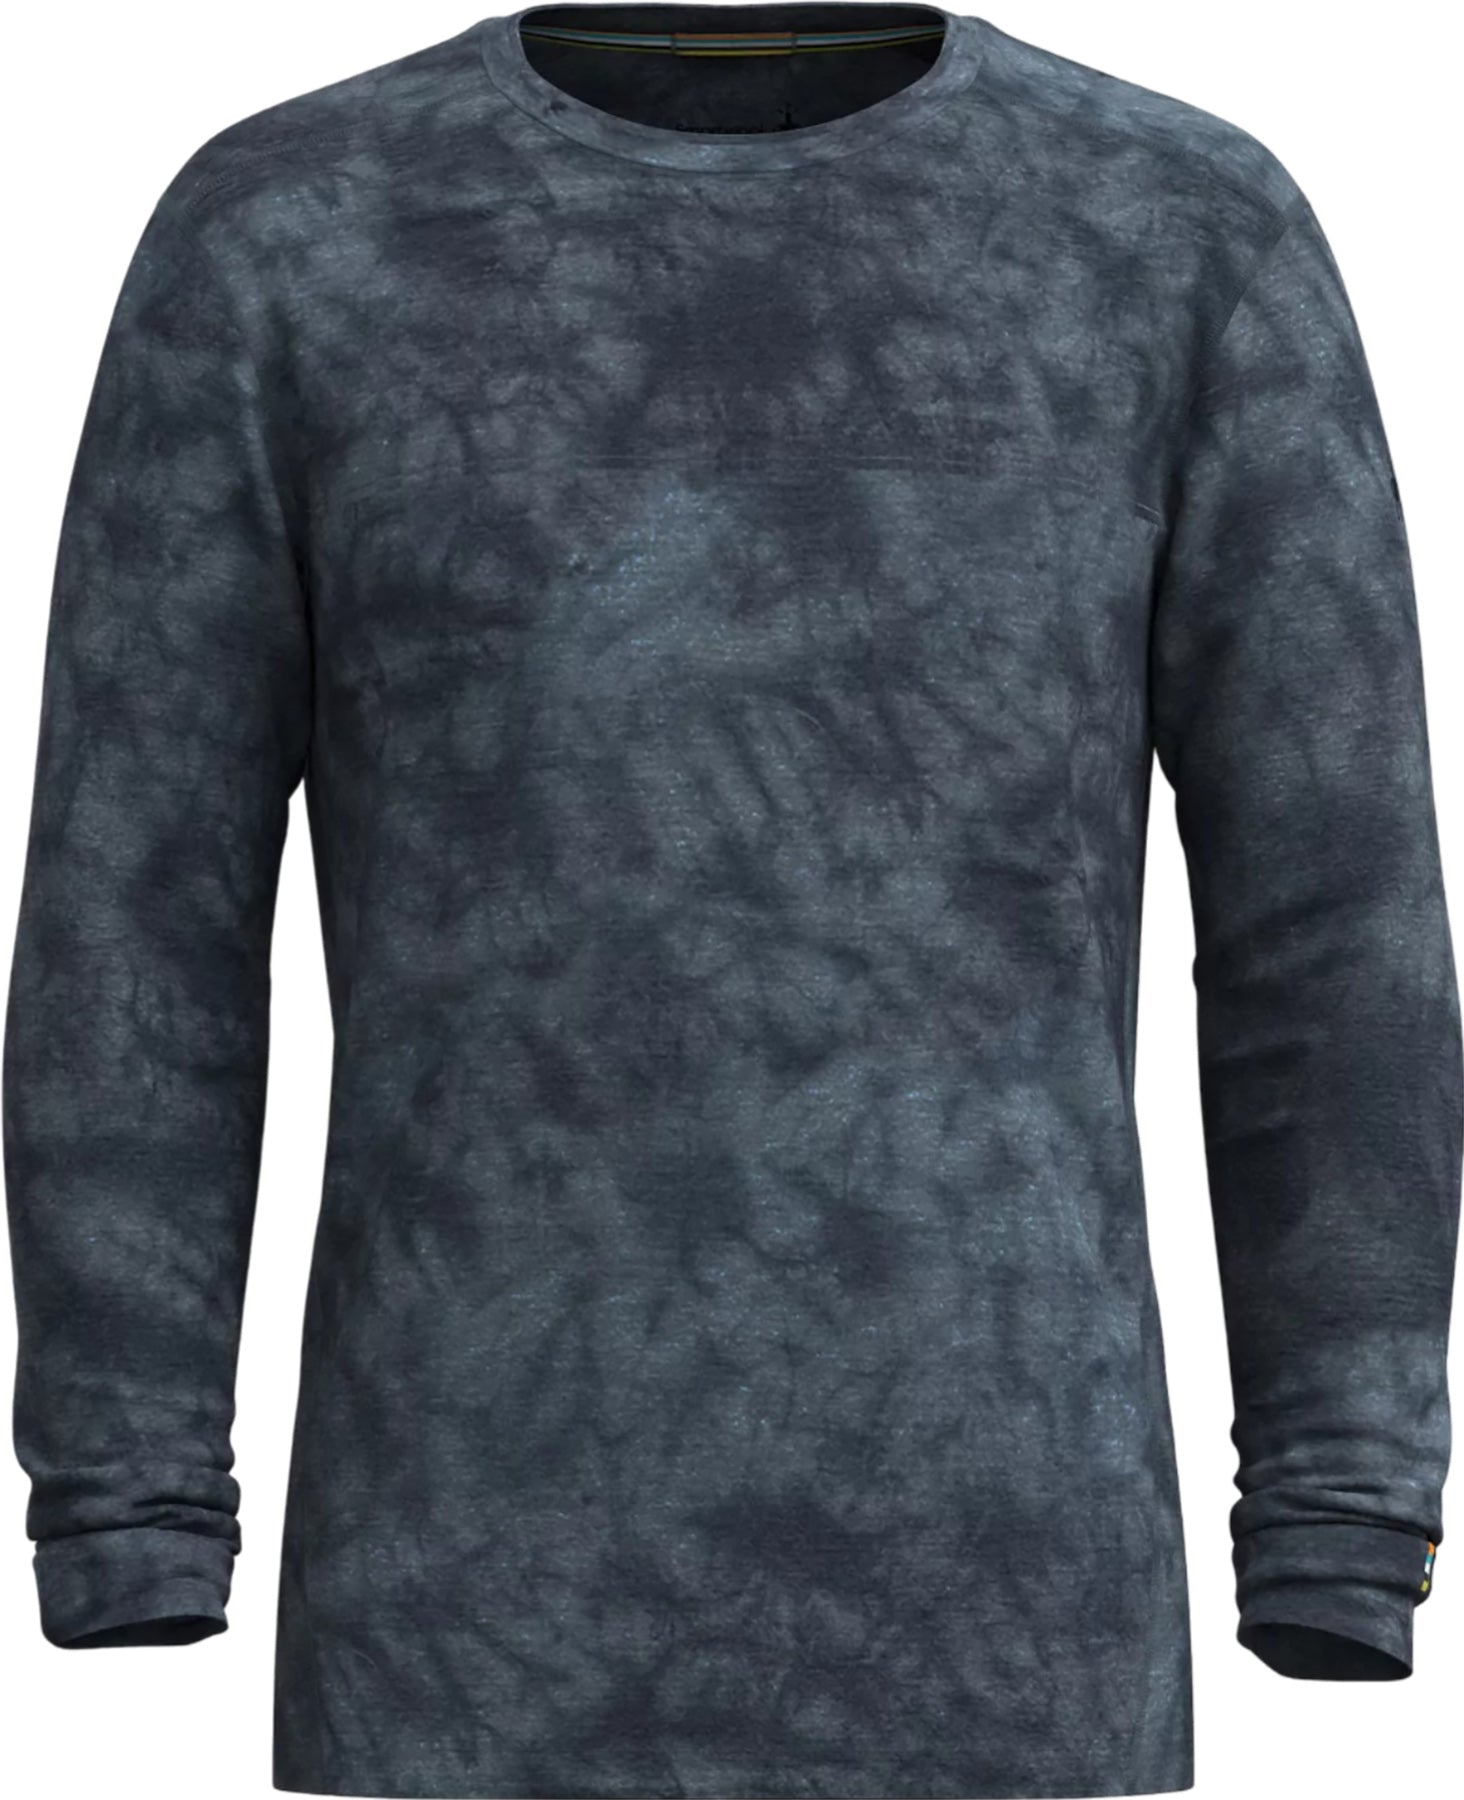 Smartwool Classic All-Season Merino Boxed Long Sleeve Base Layer - Men's L Pewter Blue Wash